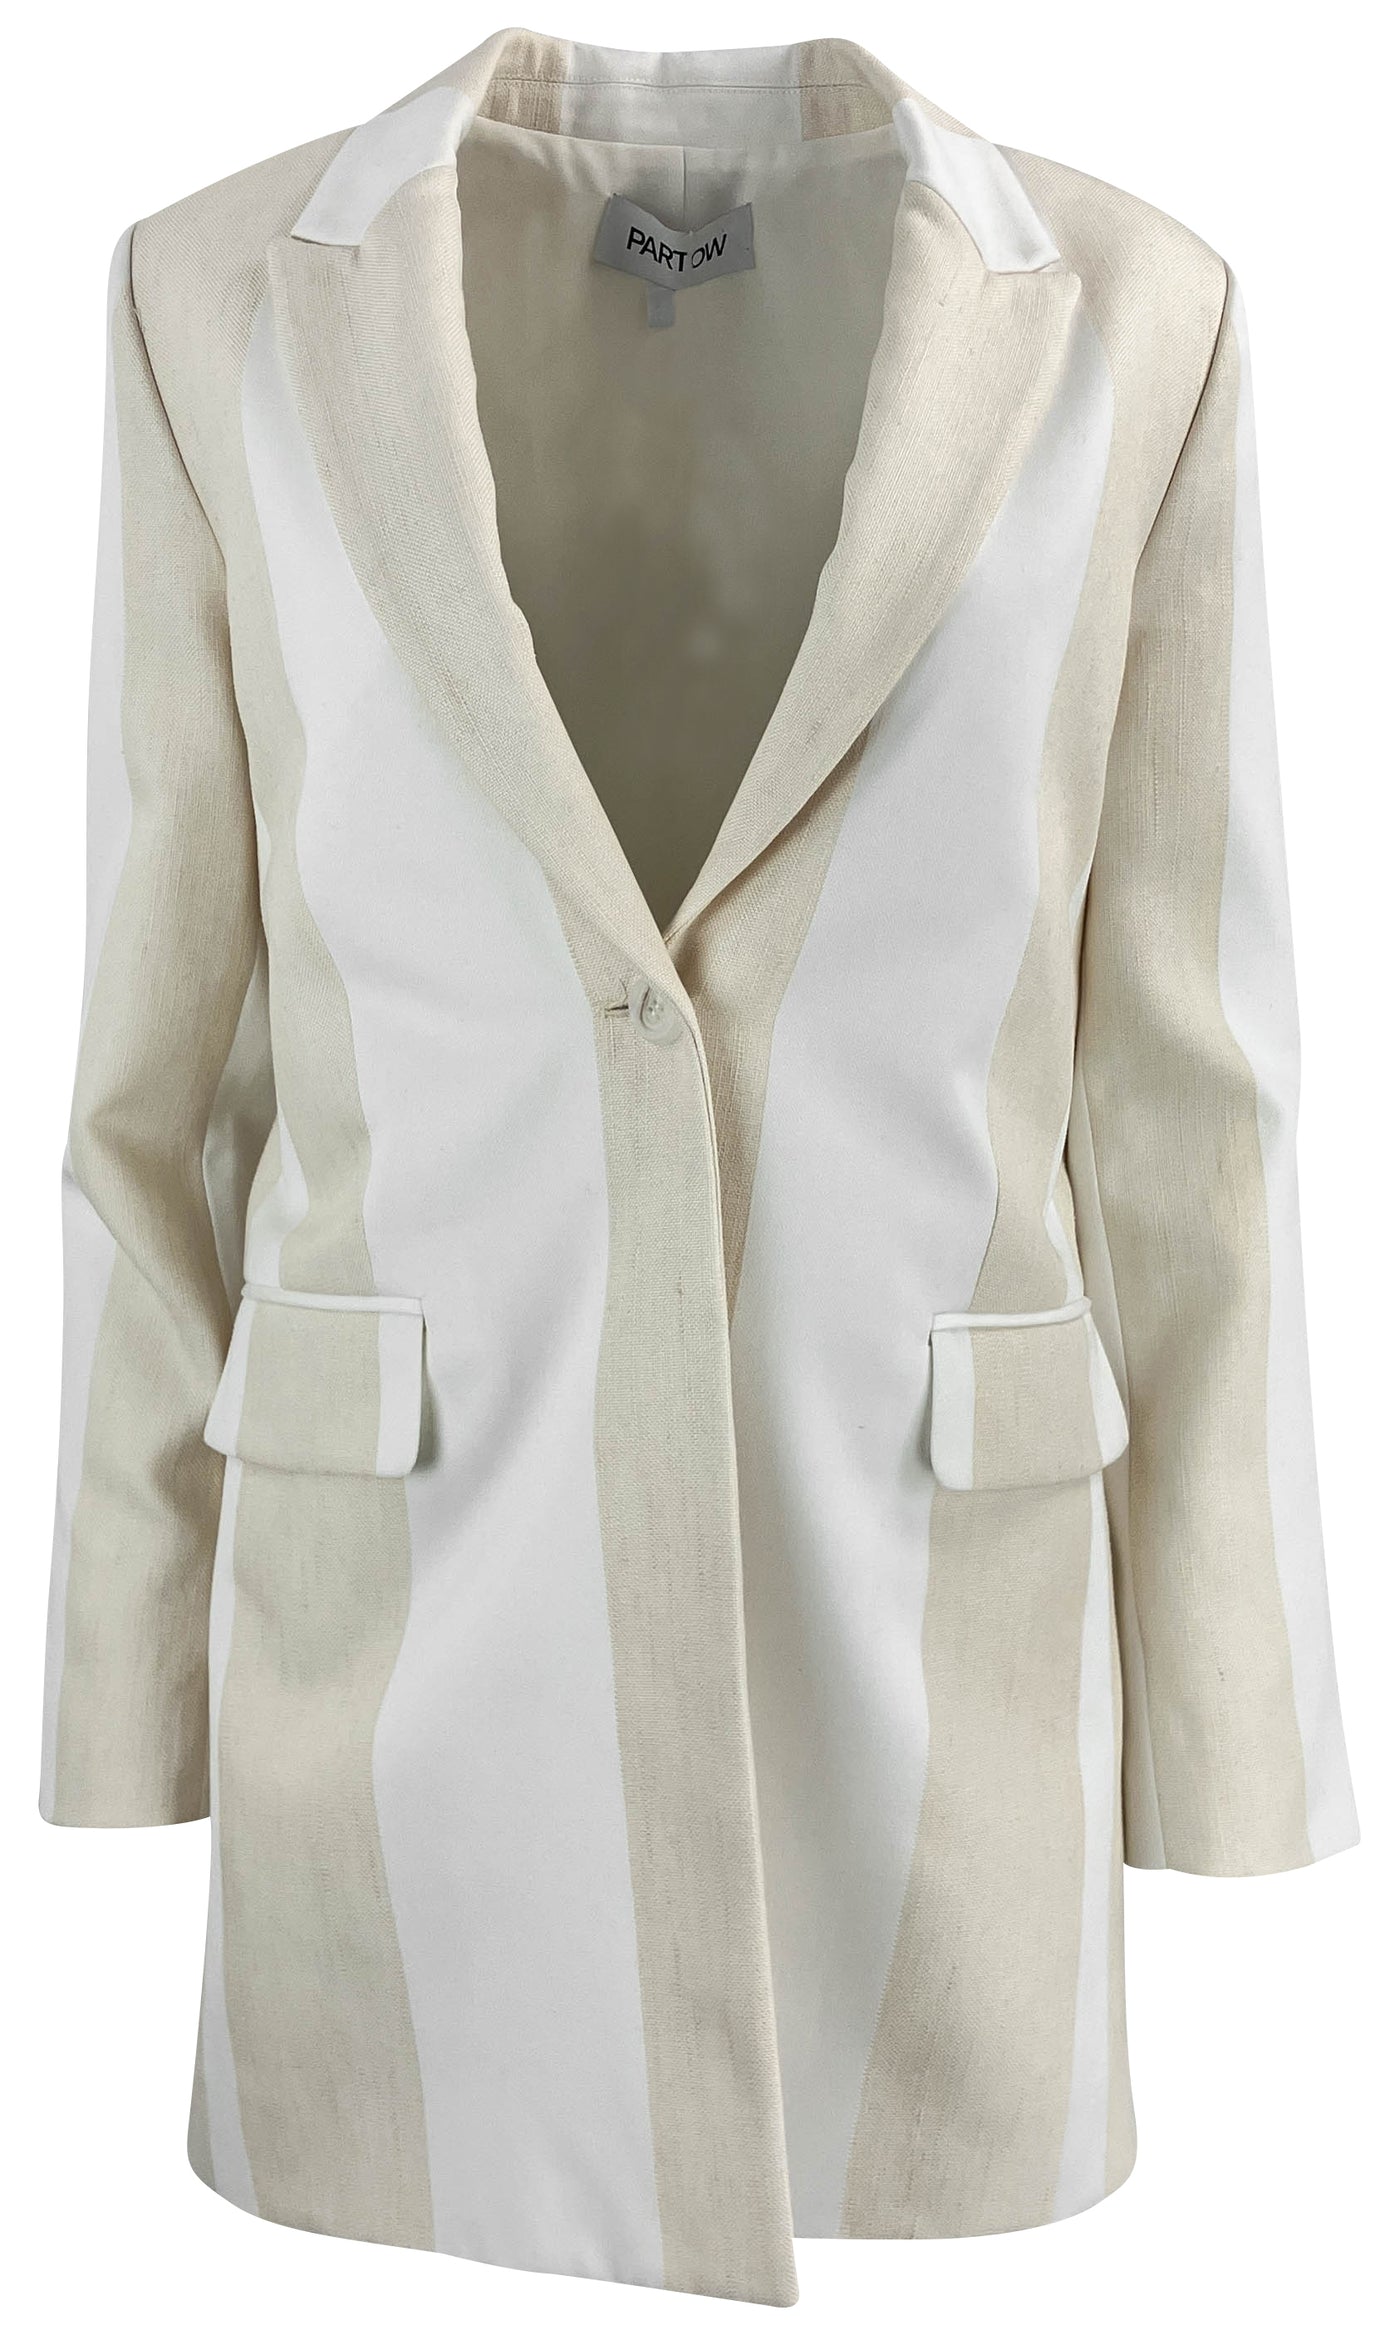 Partow Leo Jacket in Cream/White - Discounts on Partow at UAL